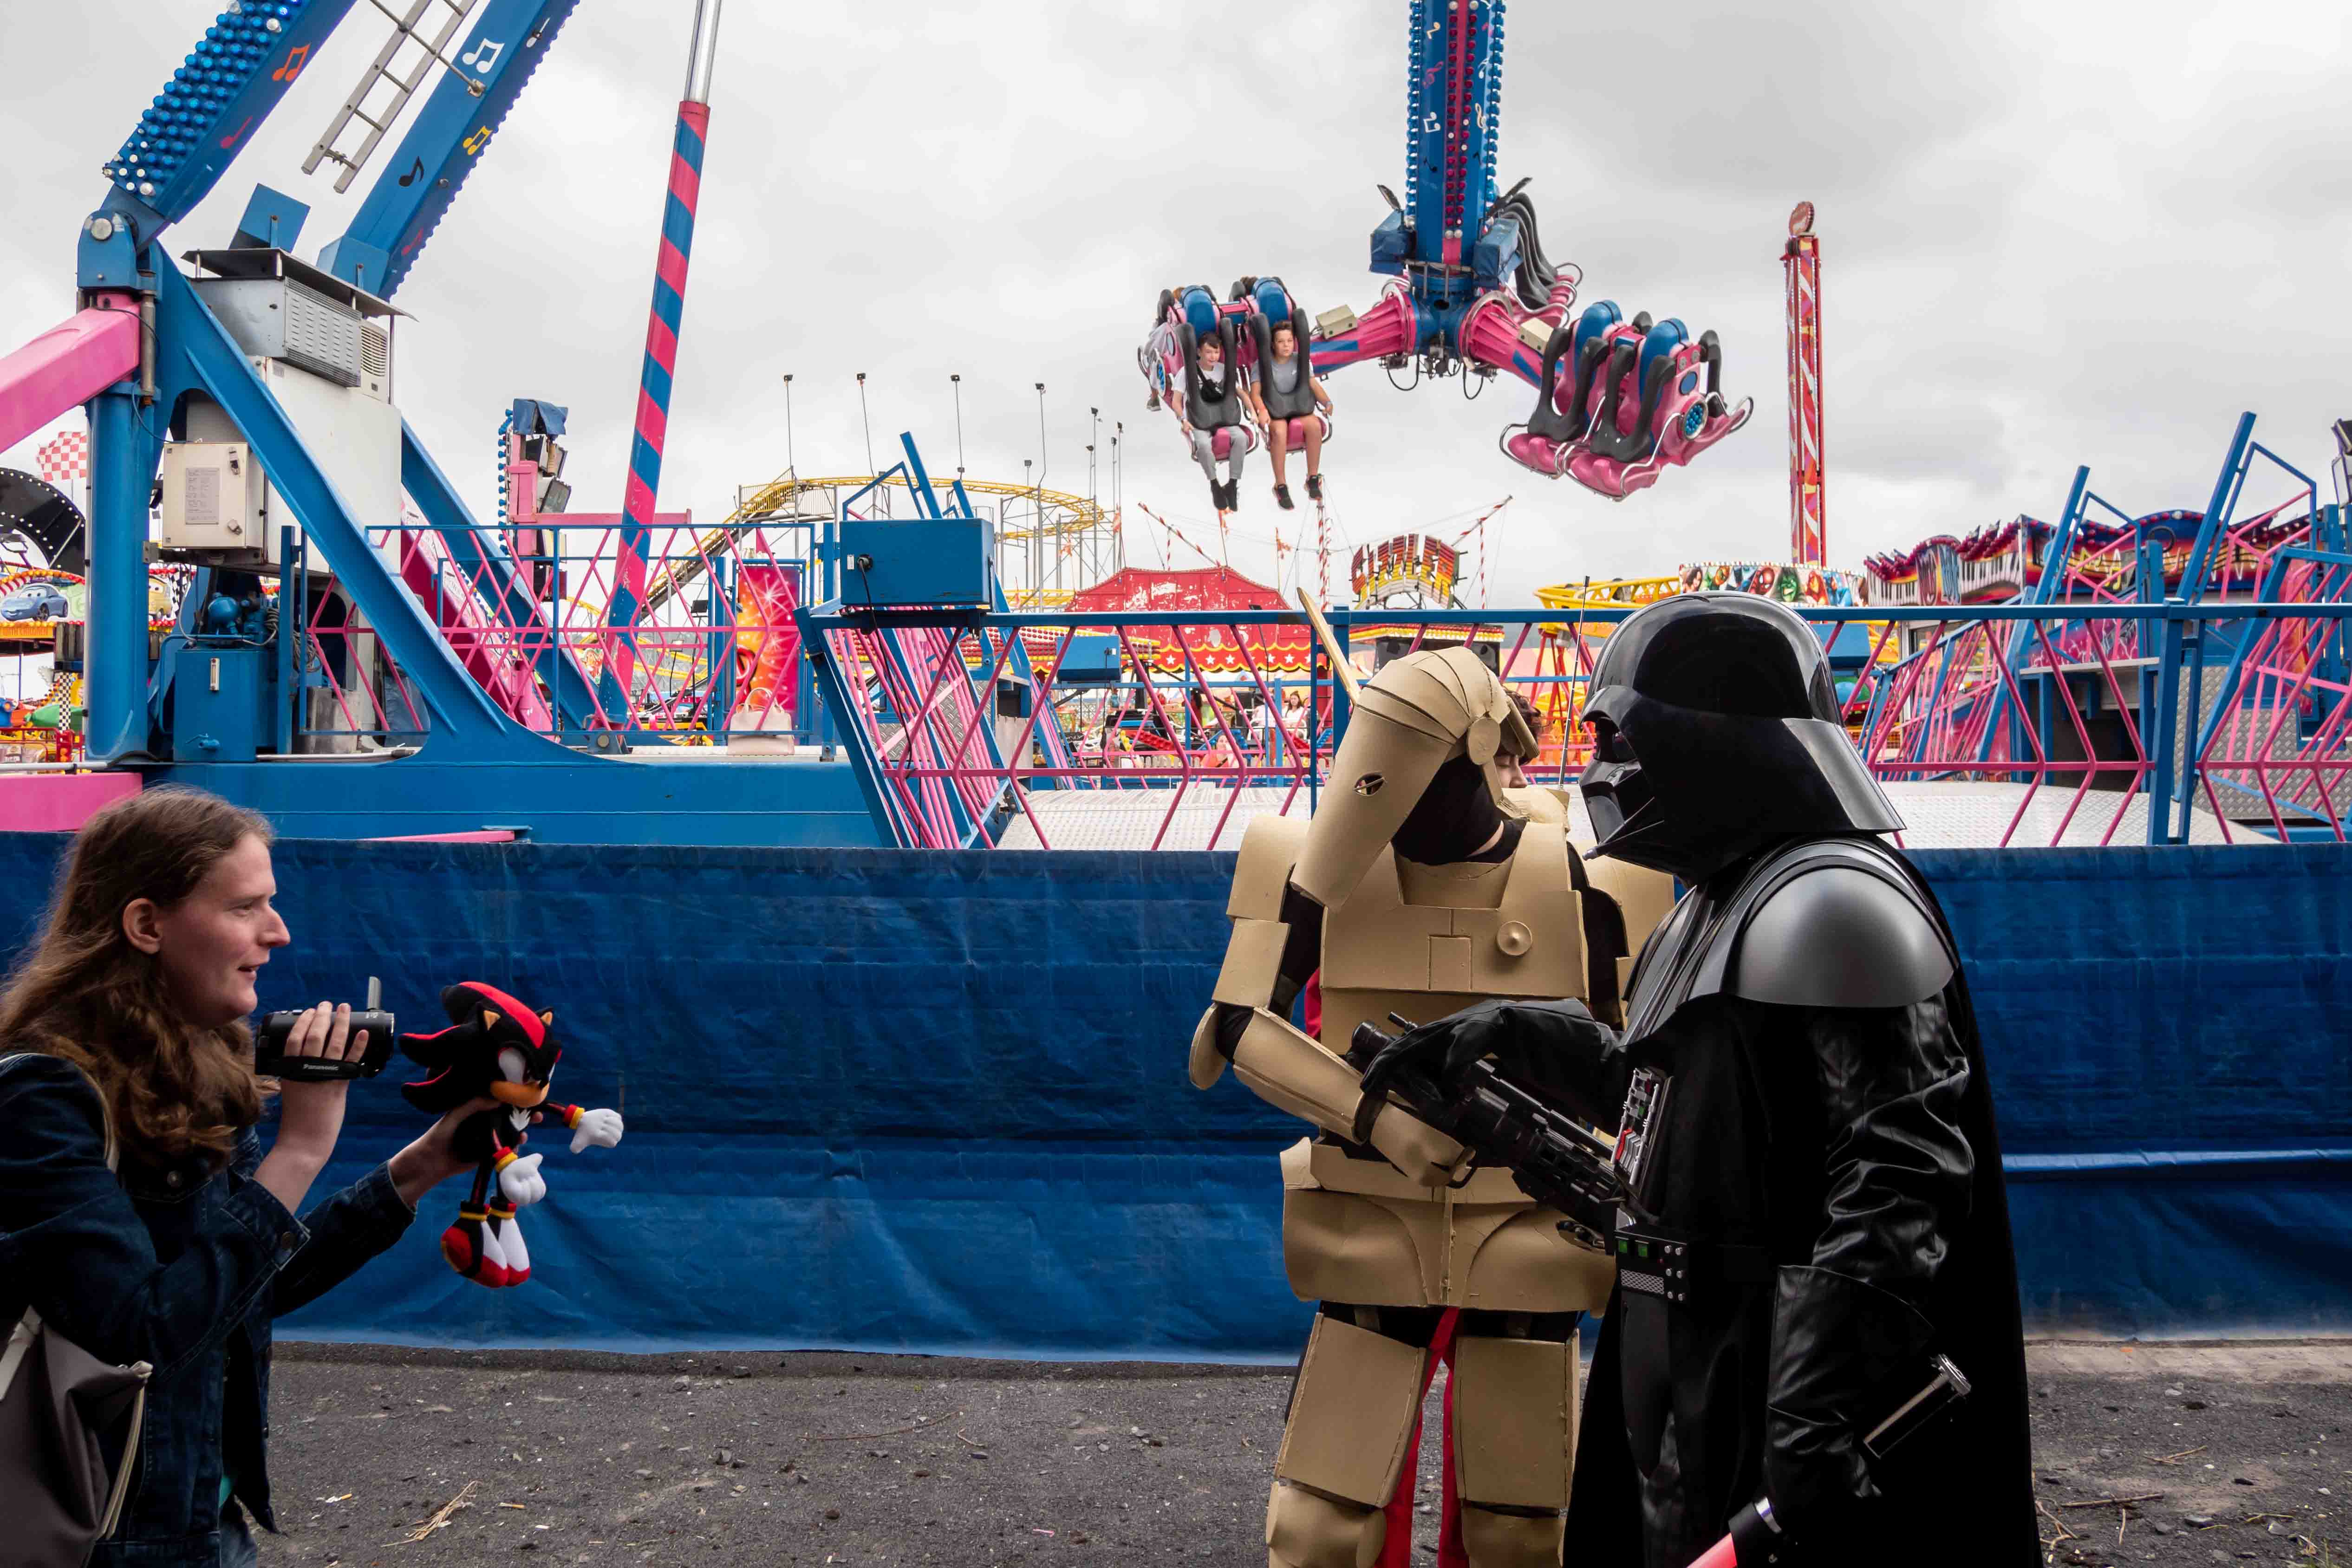 Street photography of Darth Vader in Funland in Weston-super-Mare, Somerset.